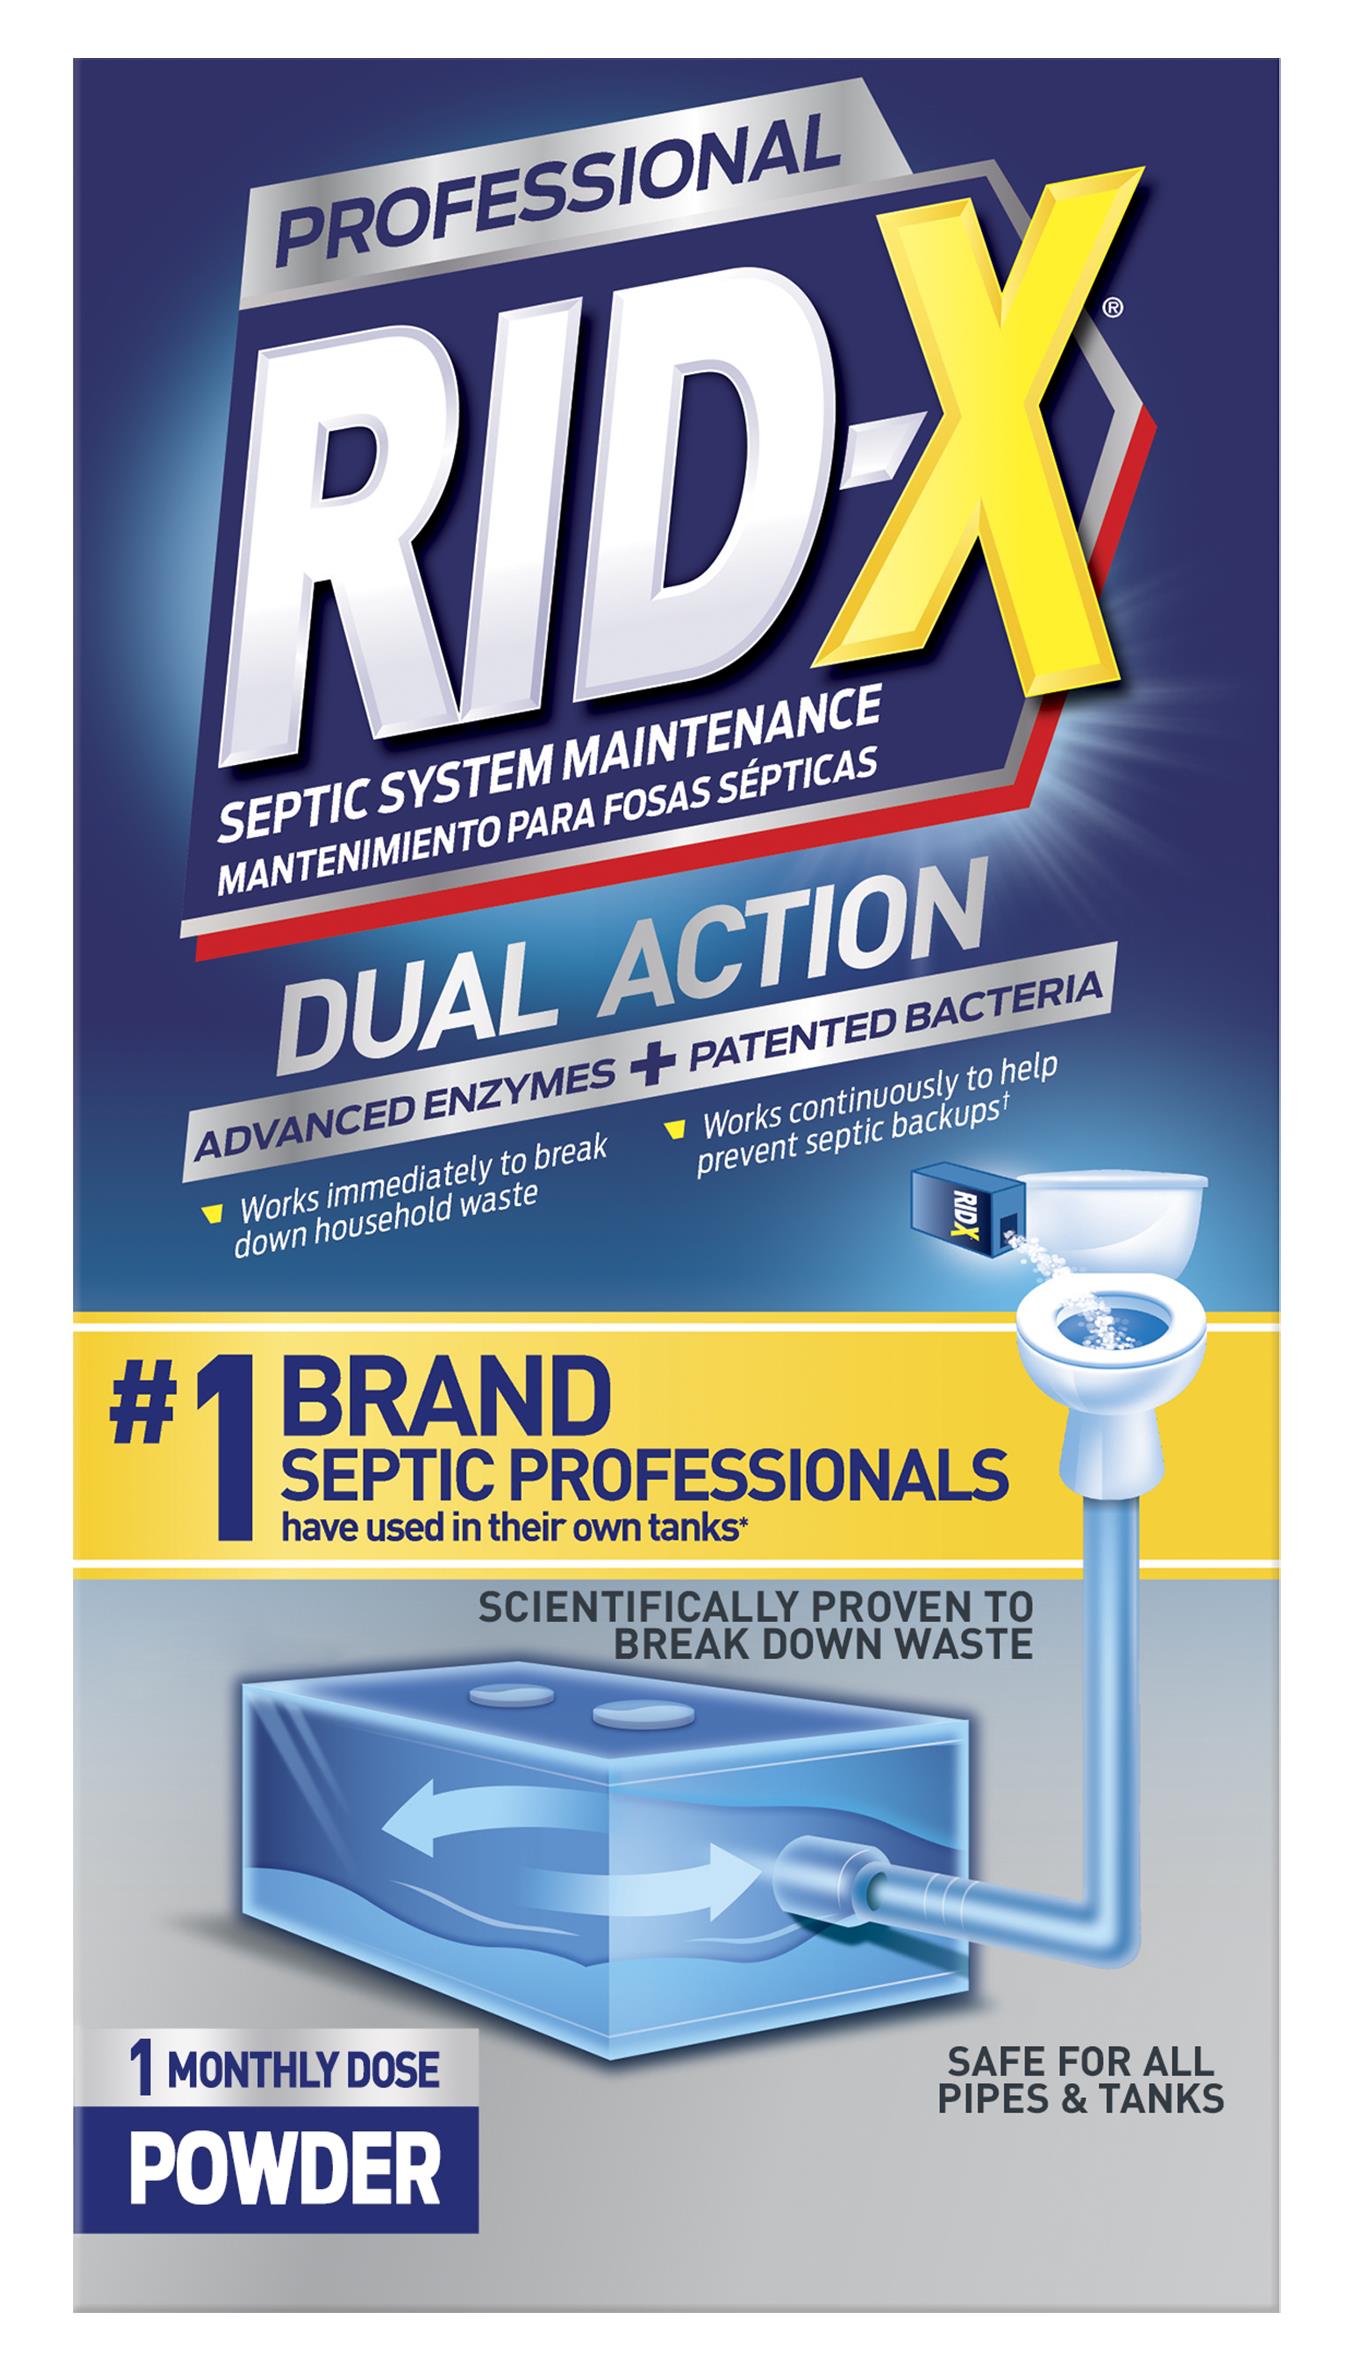  RID-X Professional Septic Treatment, 18 Month Supply